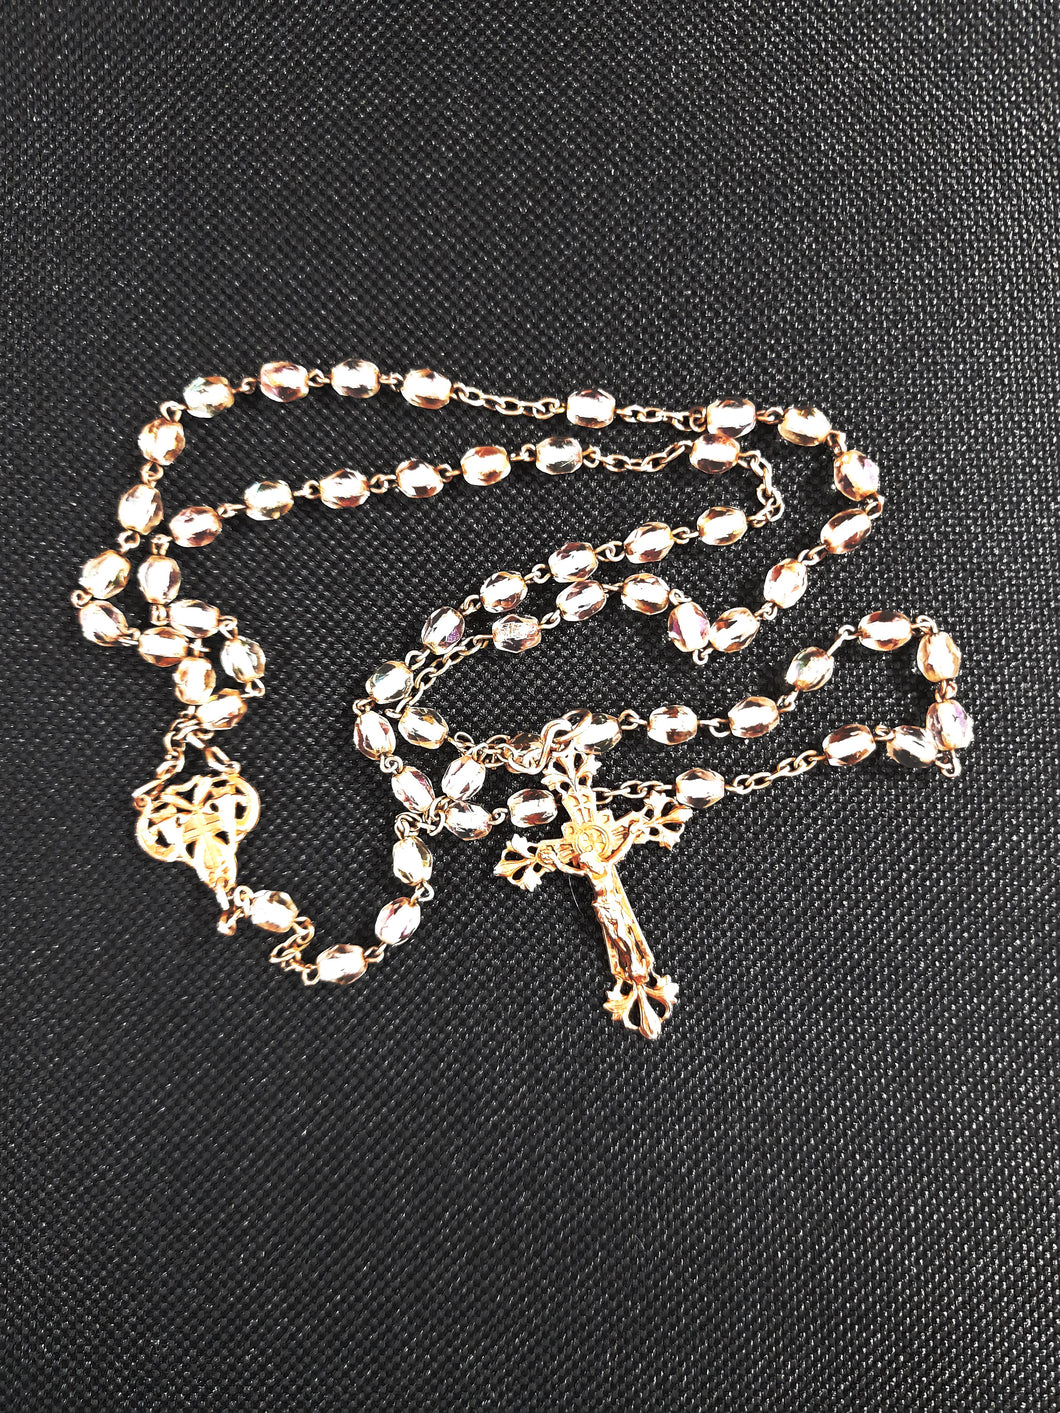 SOLD Antique Silver Rosary, French With Hand Cut Aurora Borealis Beads Five Decade, Original Mother of Pearl Case, By Alfred Eugène Souville 1882